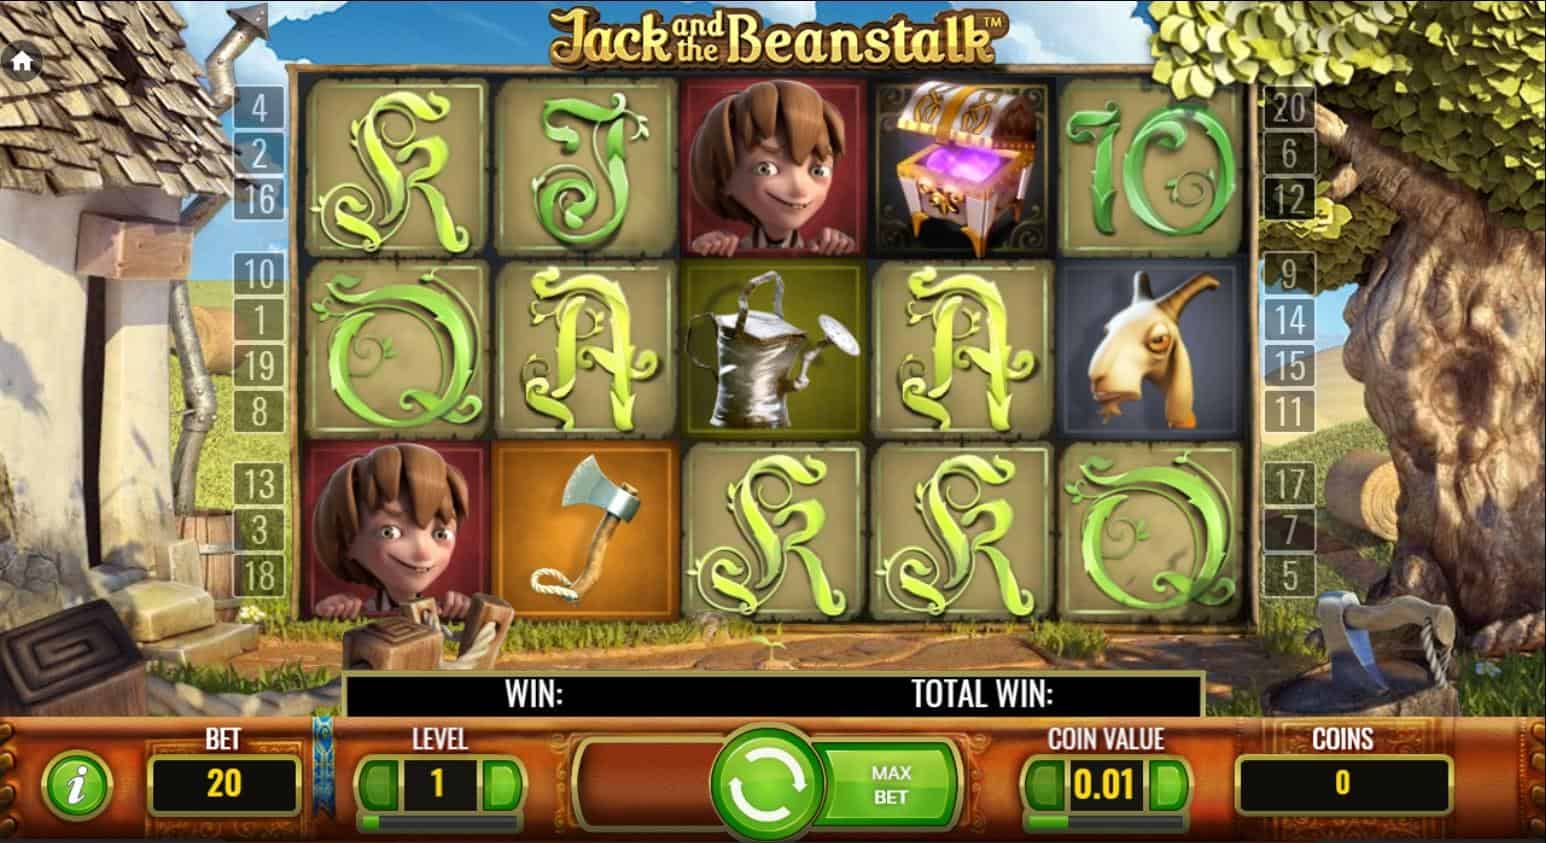 Jack and The Beanstalk by NetEnt